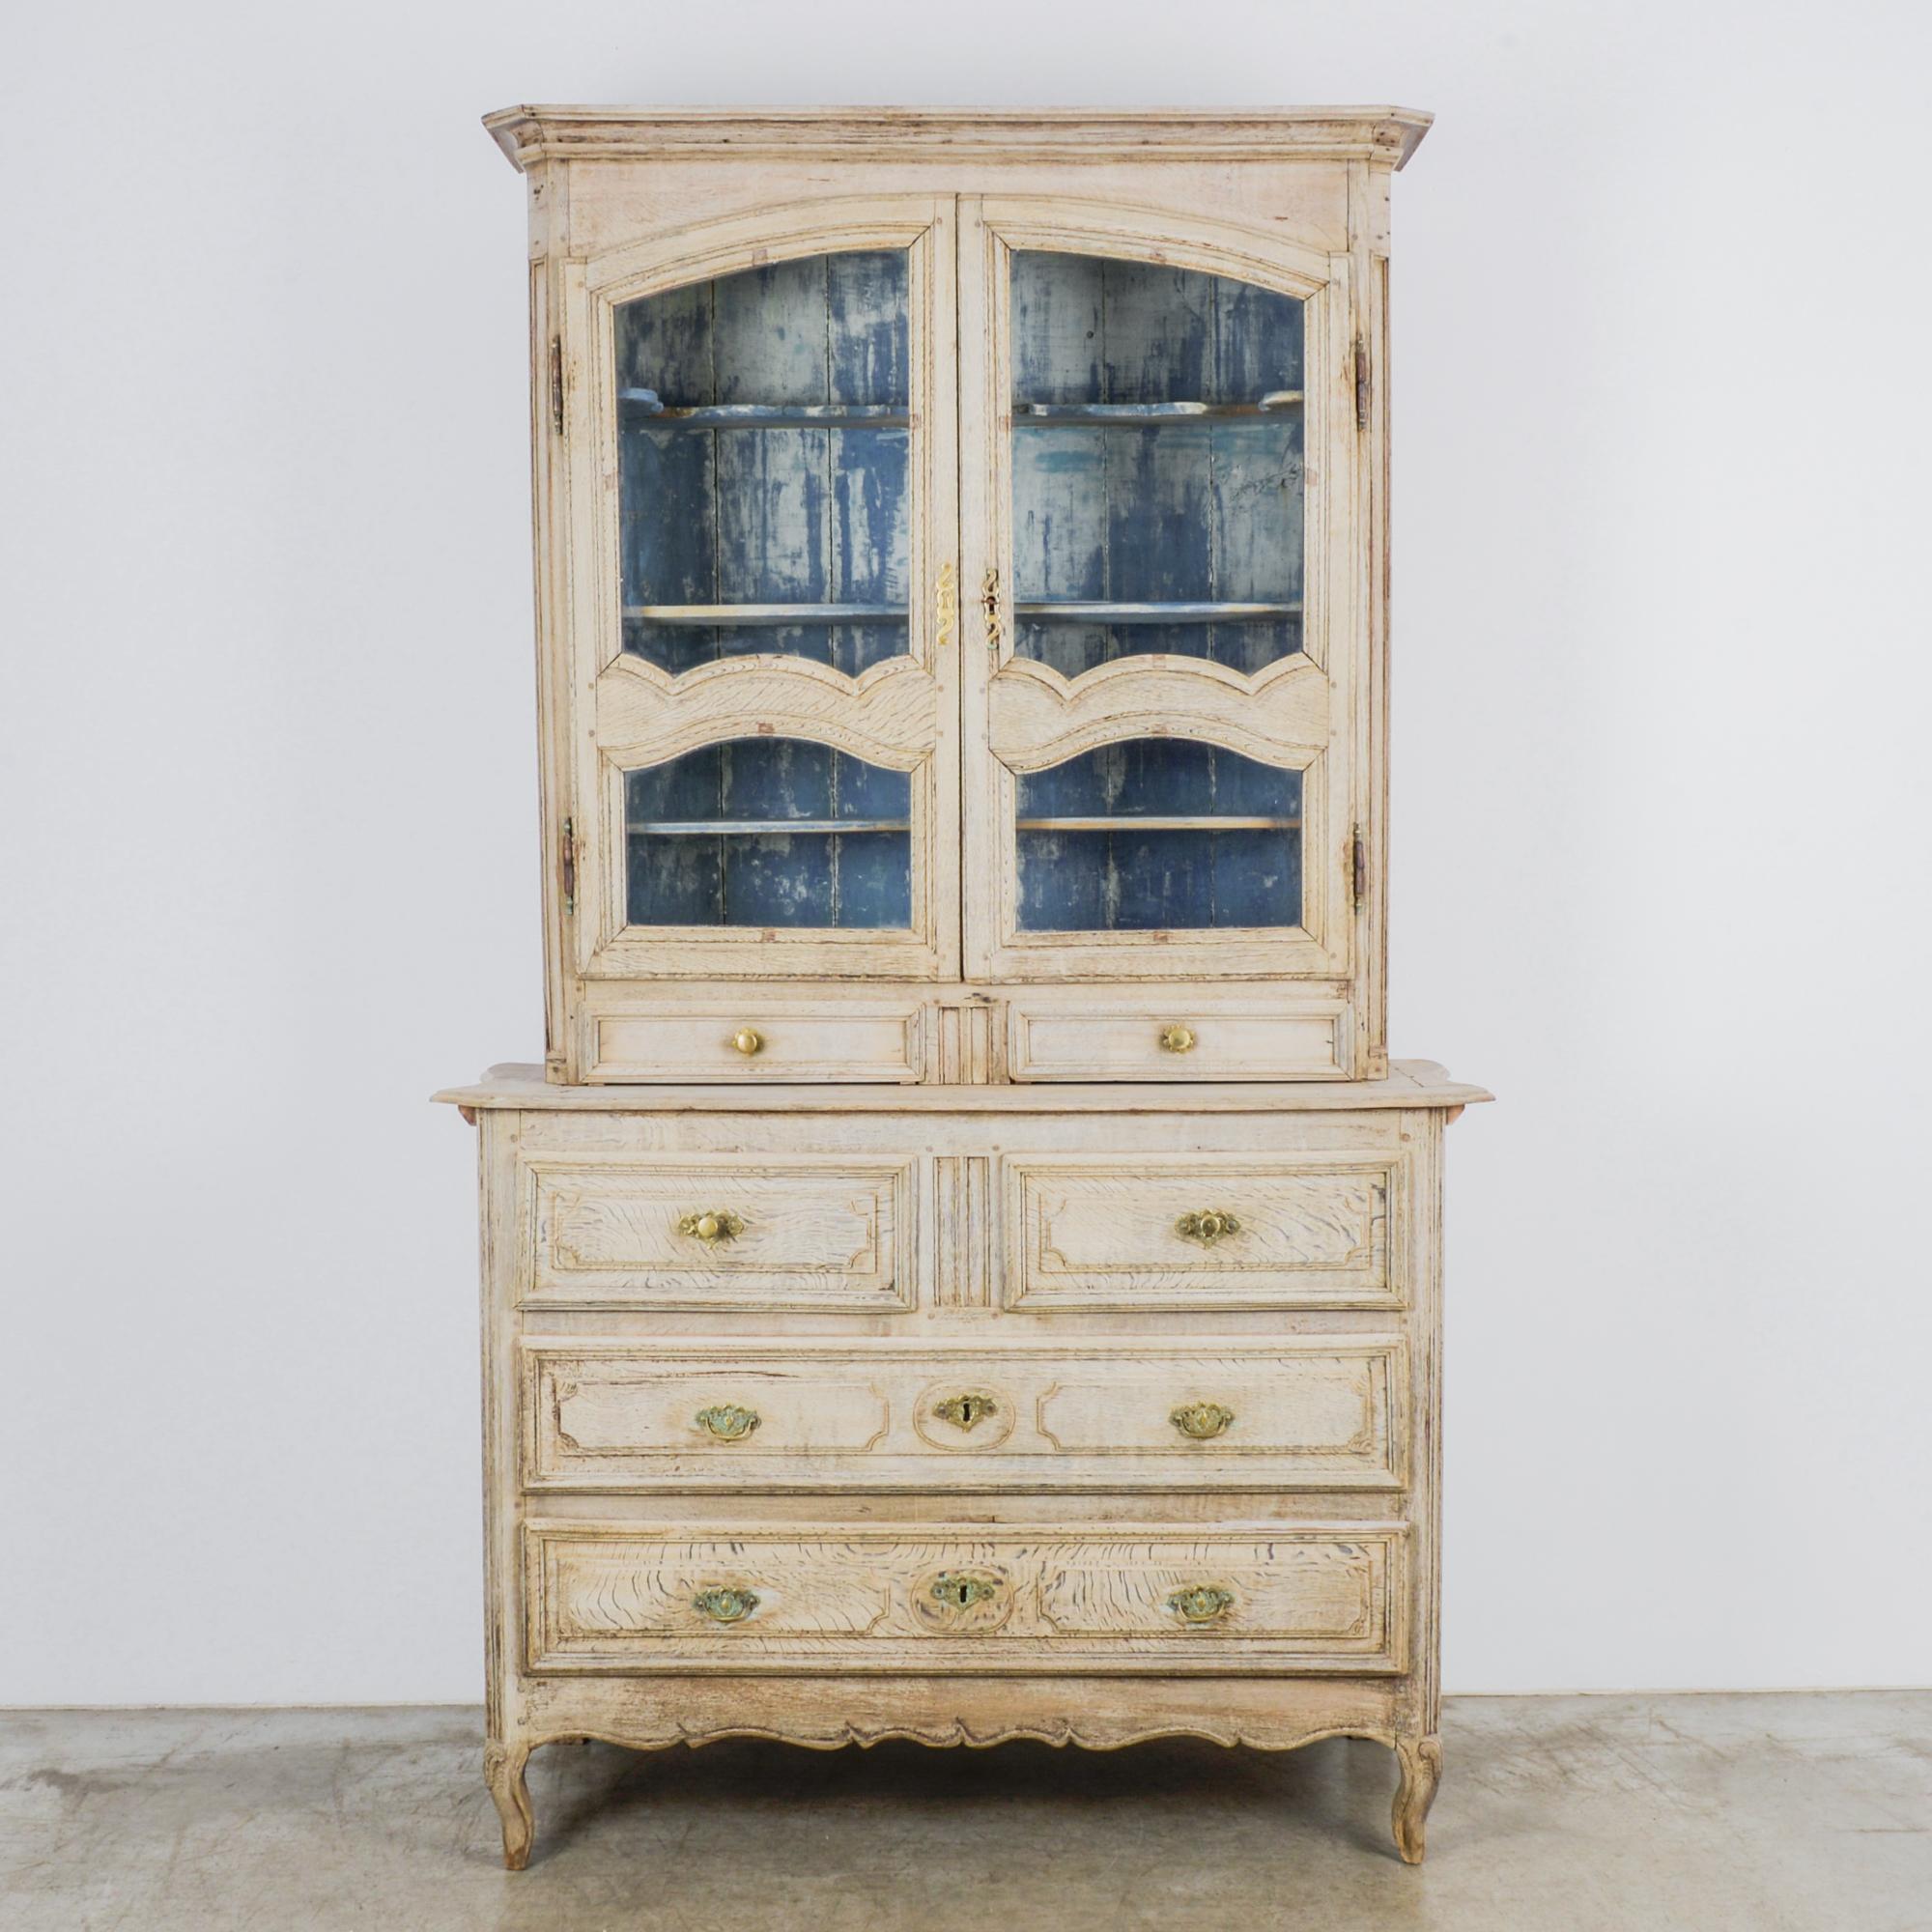 This bleached oak vitrine was made in France, circa 1820. The blue and white interior of the upper section is visible through the panes of the double doors. The lower section houses additional drawers and is raised on cabriole legs. The vitrine